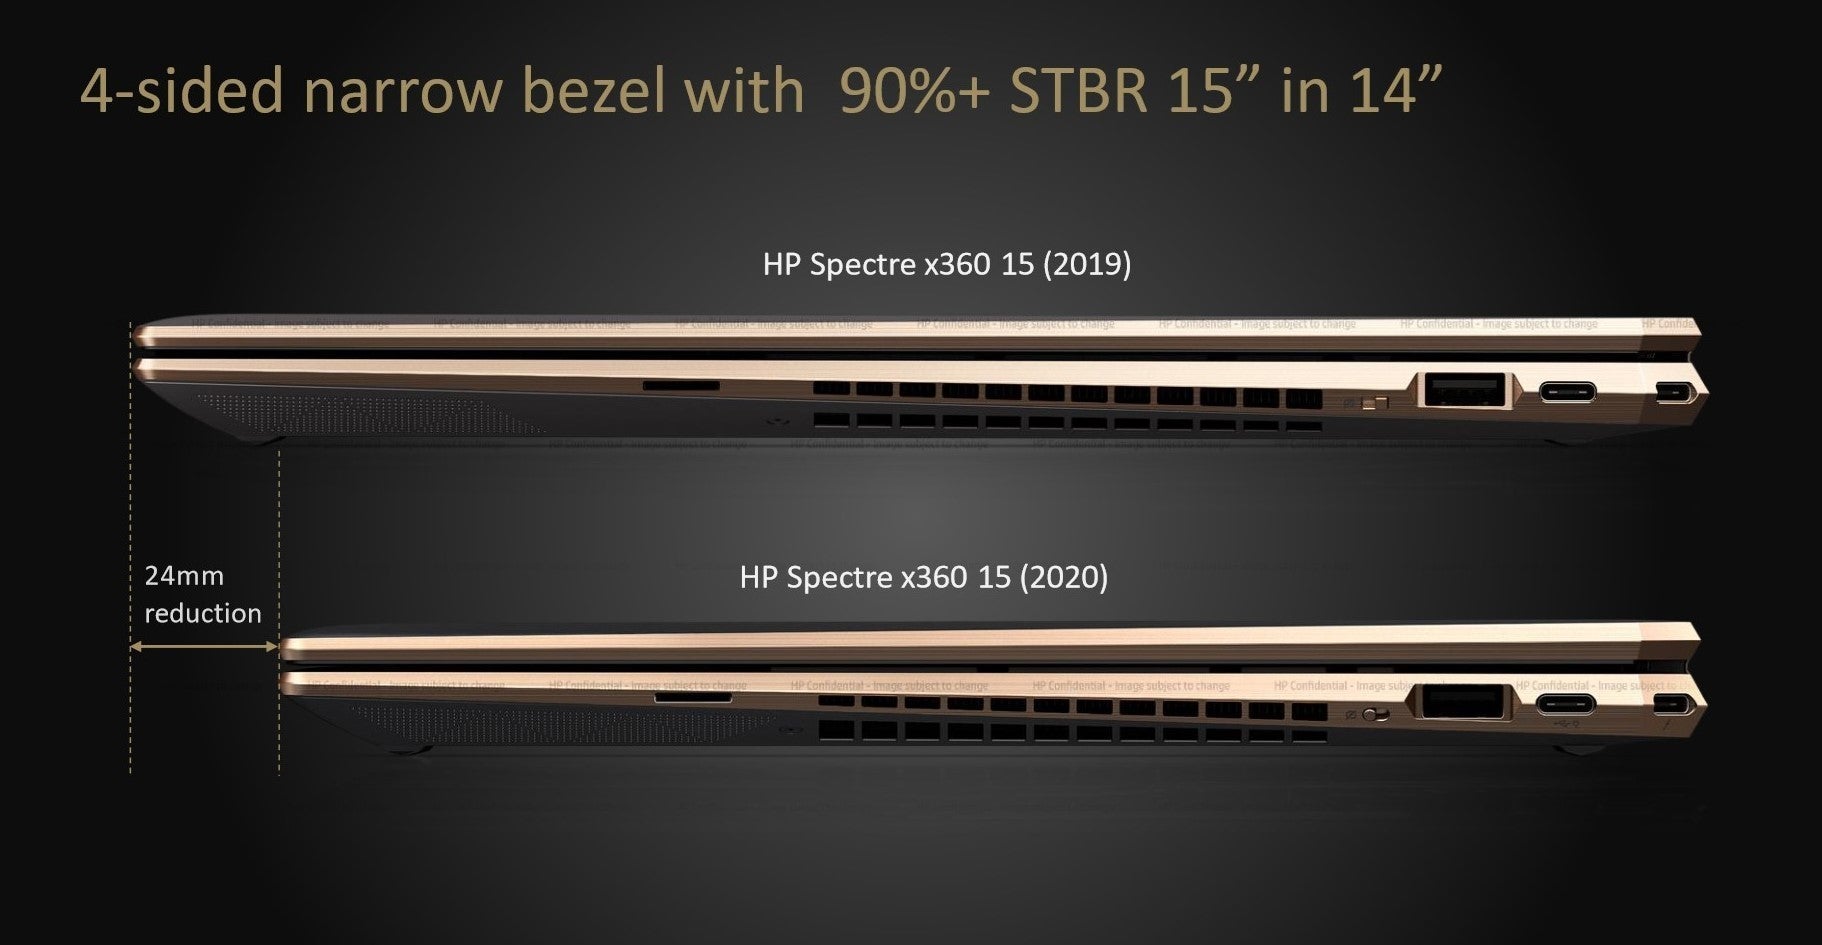 HP's Spectre x360 15t offers 4K resolution without killing battery, and